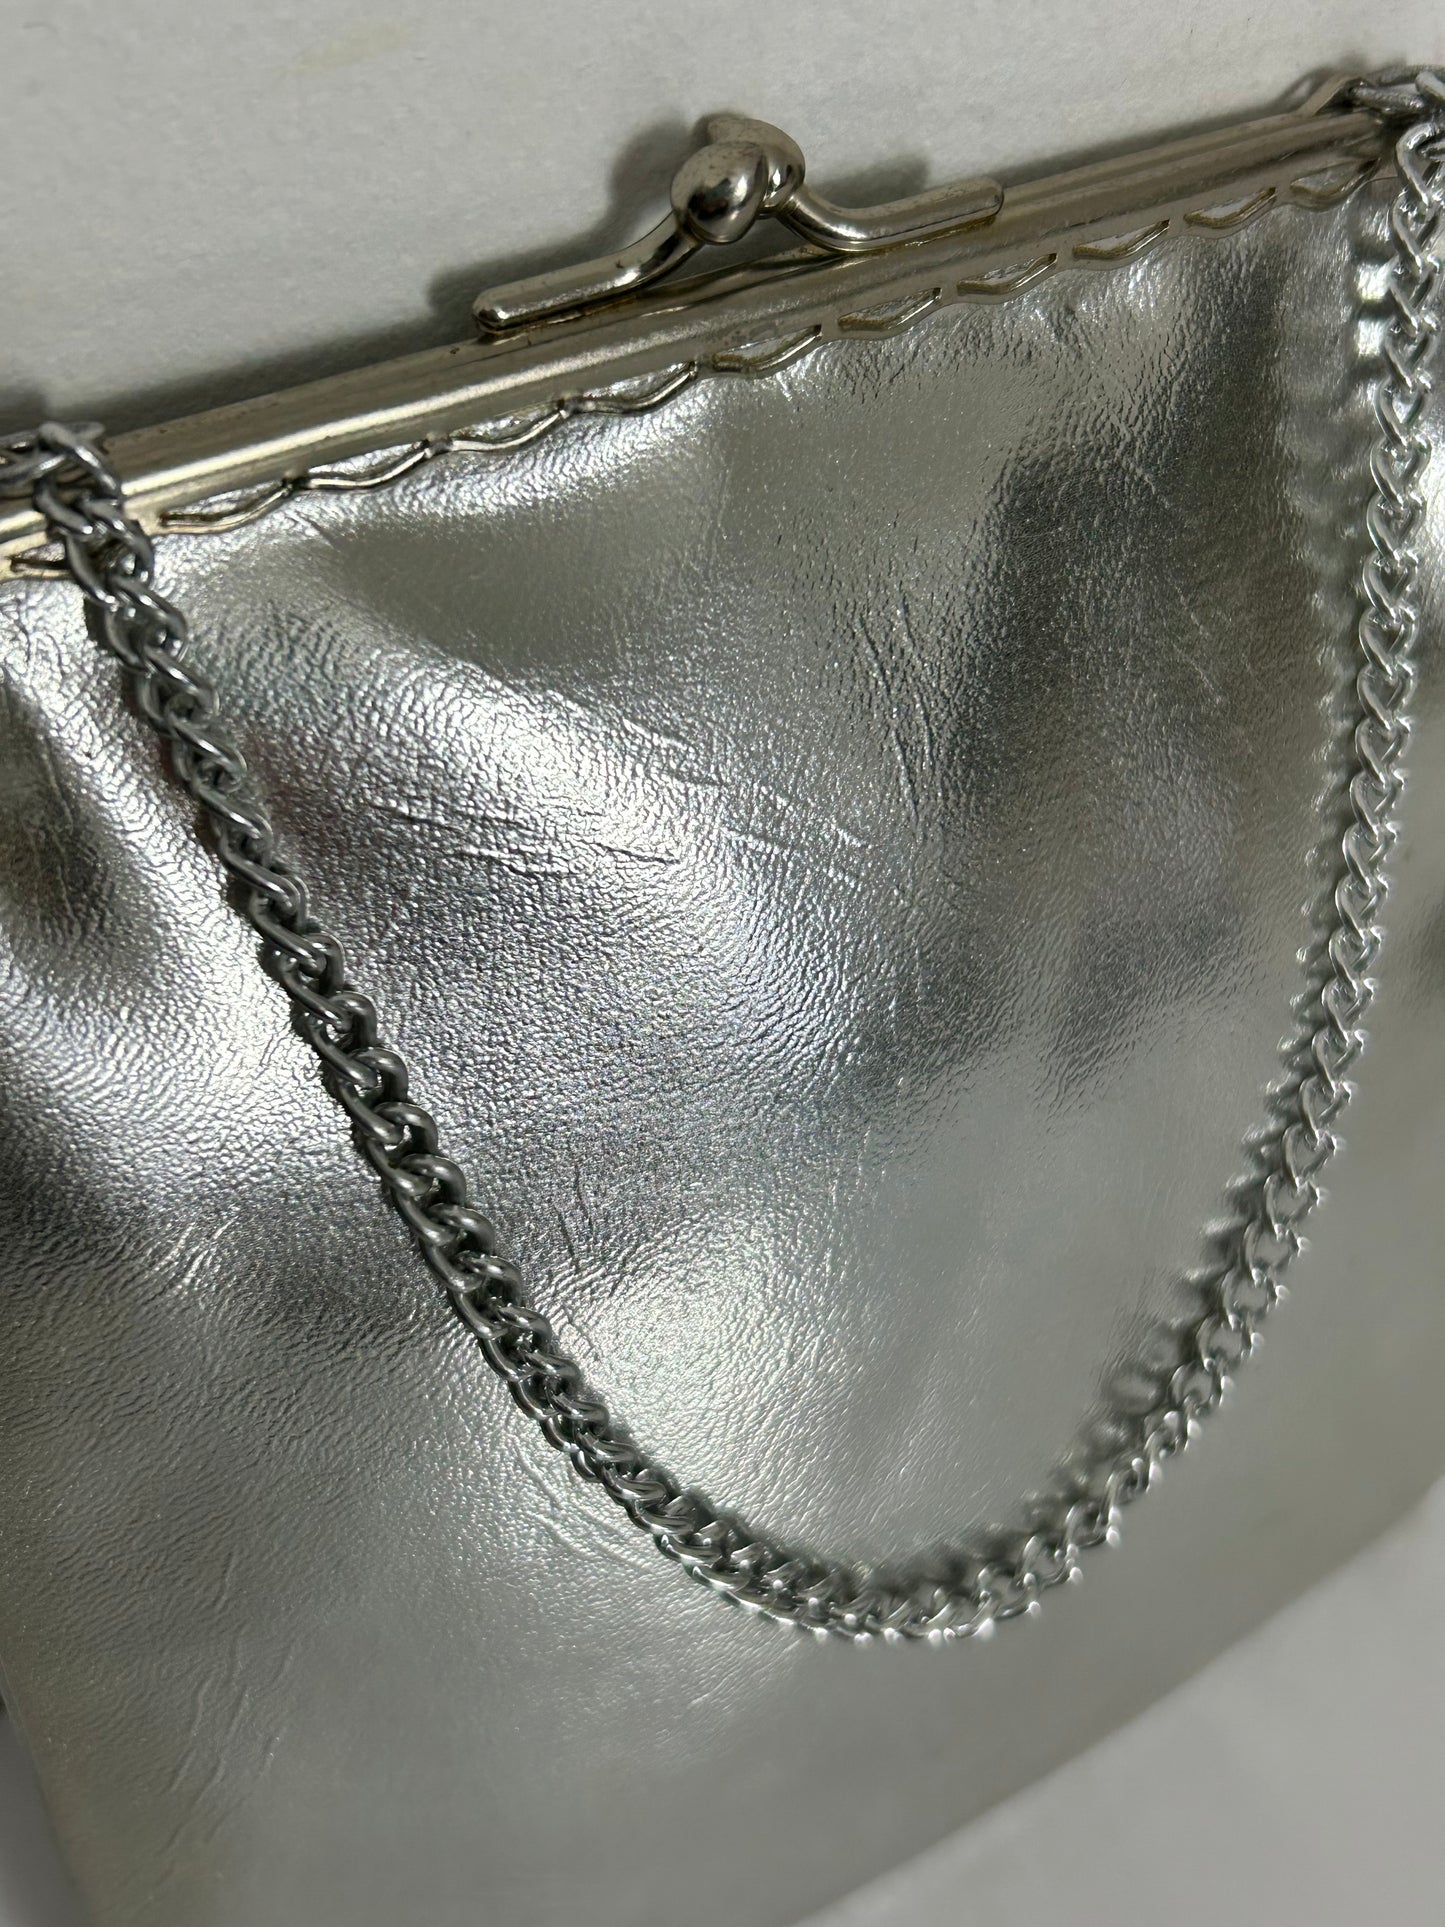 Vintage 1960s Metallic Silver Chain Strap Evening Party Occasion Bag